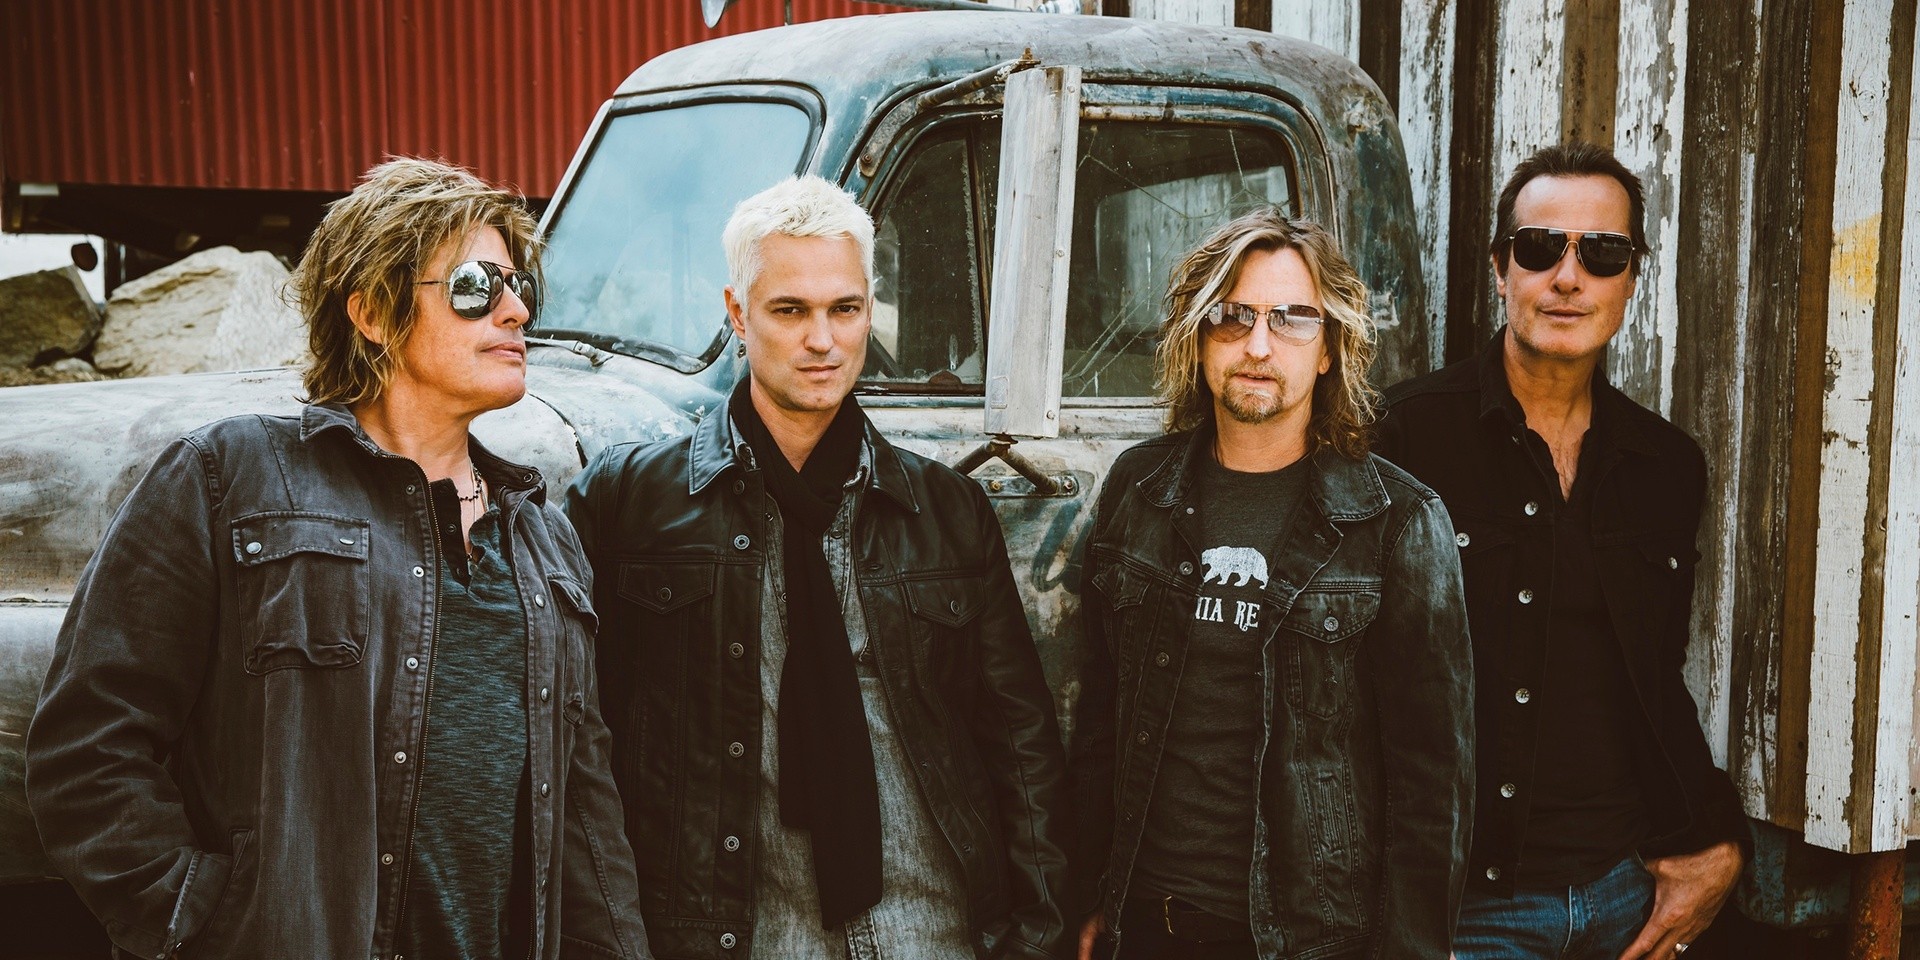 Stone Temple Pilots release new song 'Roll Me Under' – listen